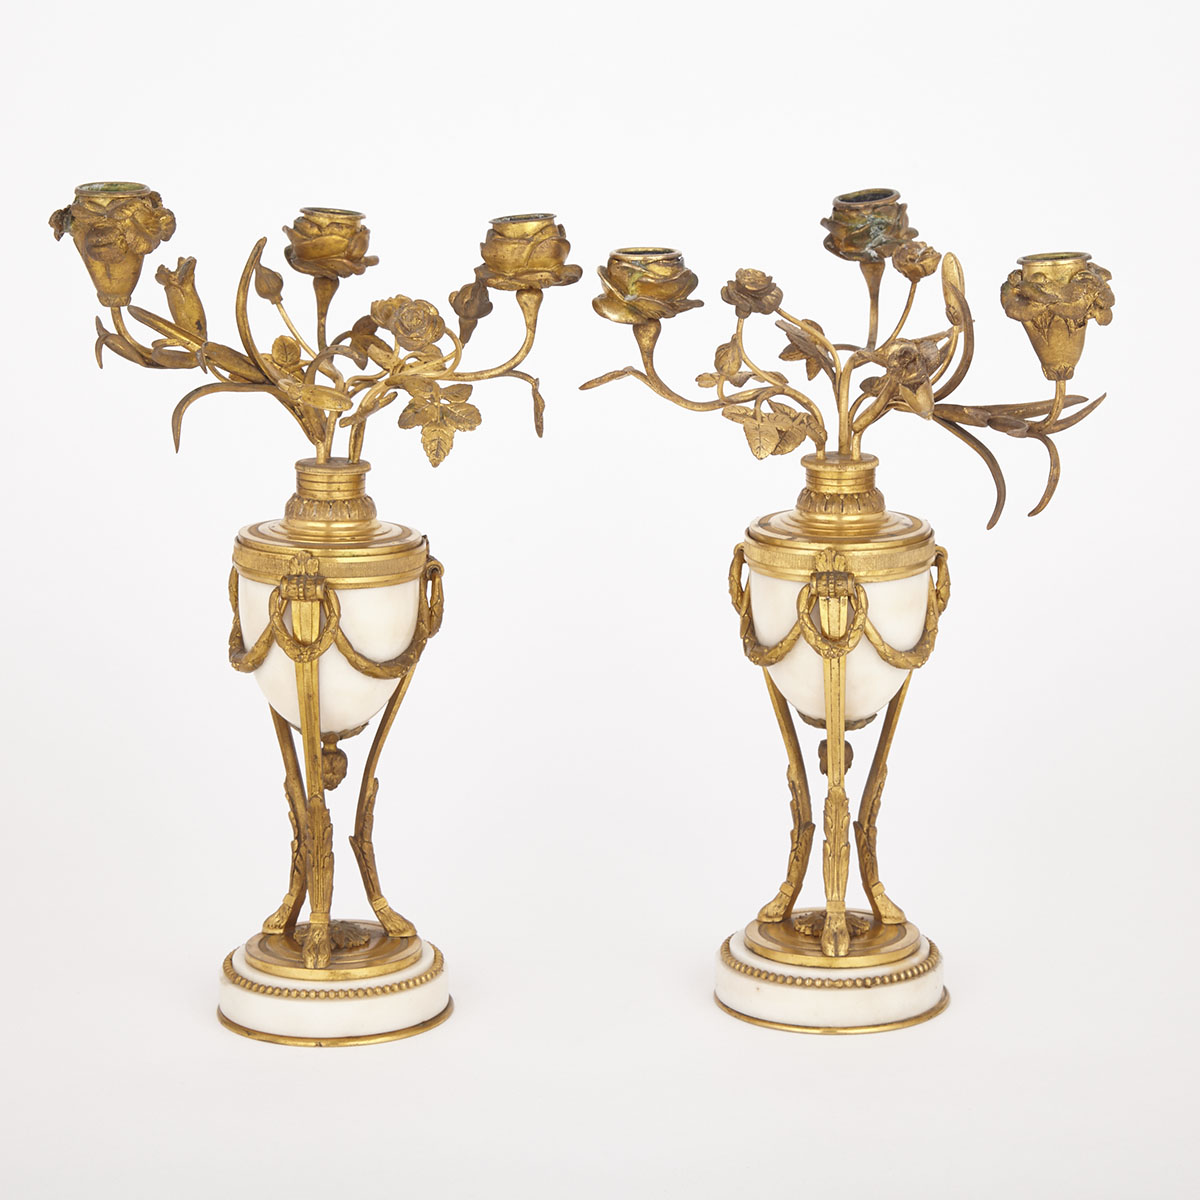 Pair of Louis XVI Style Gilt Bronze and White Marble Cassolette  Candelabra, 19th century